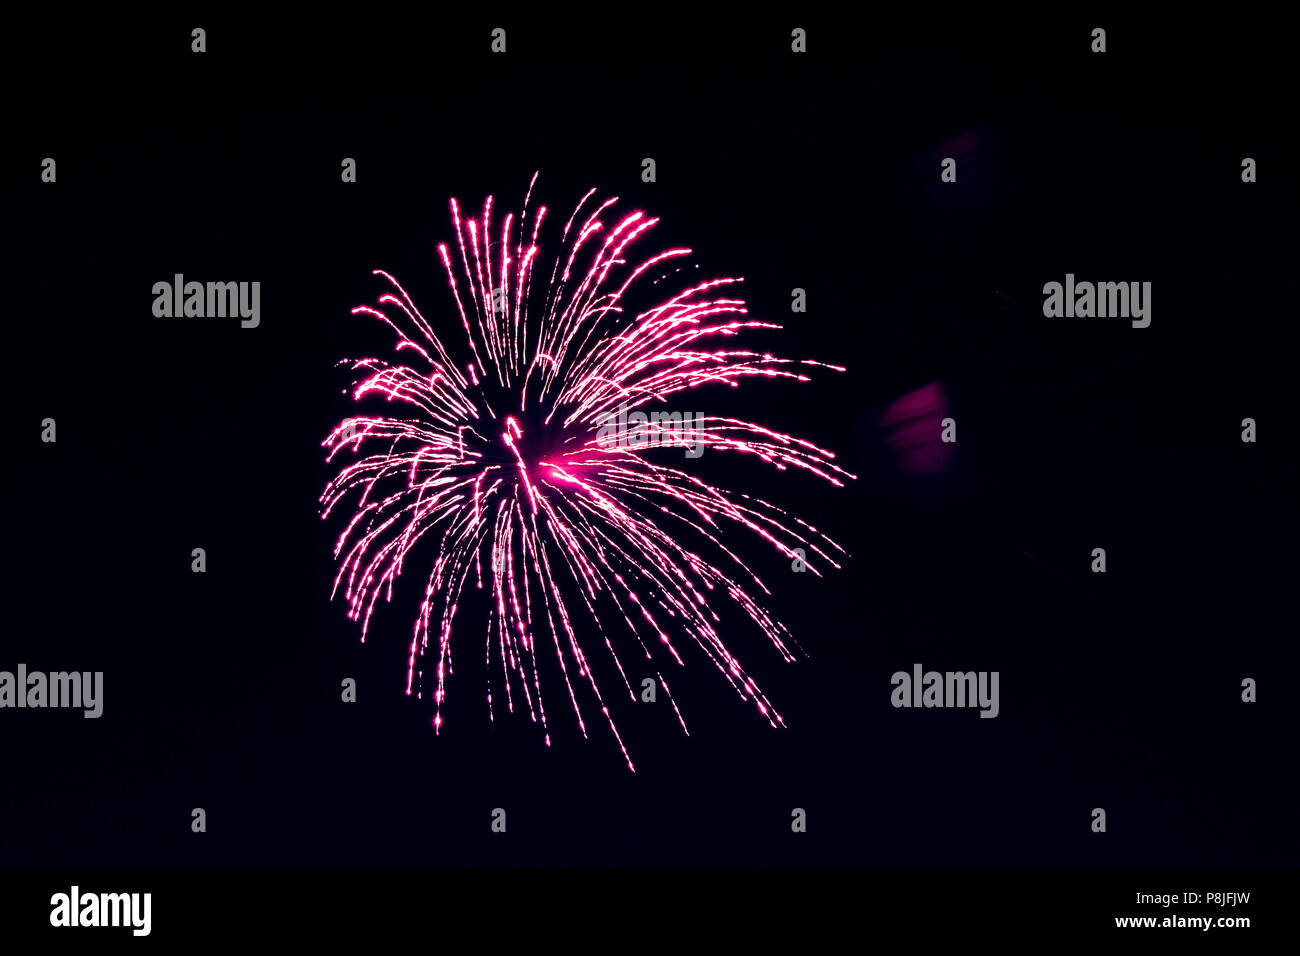 Fireworks From 4th of July Stock Photo